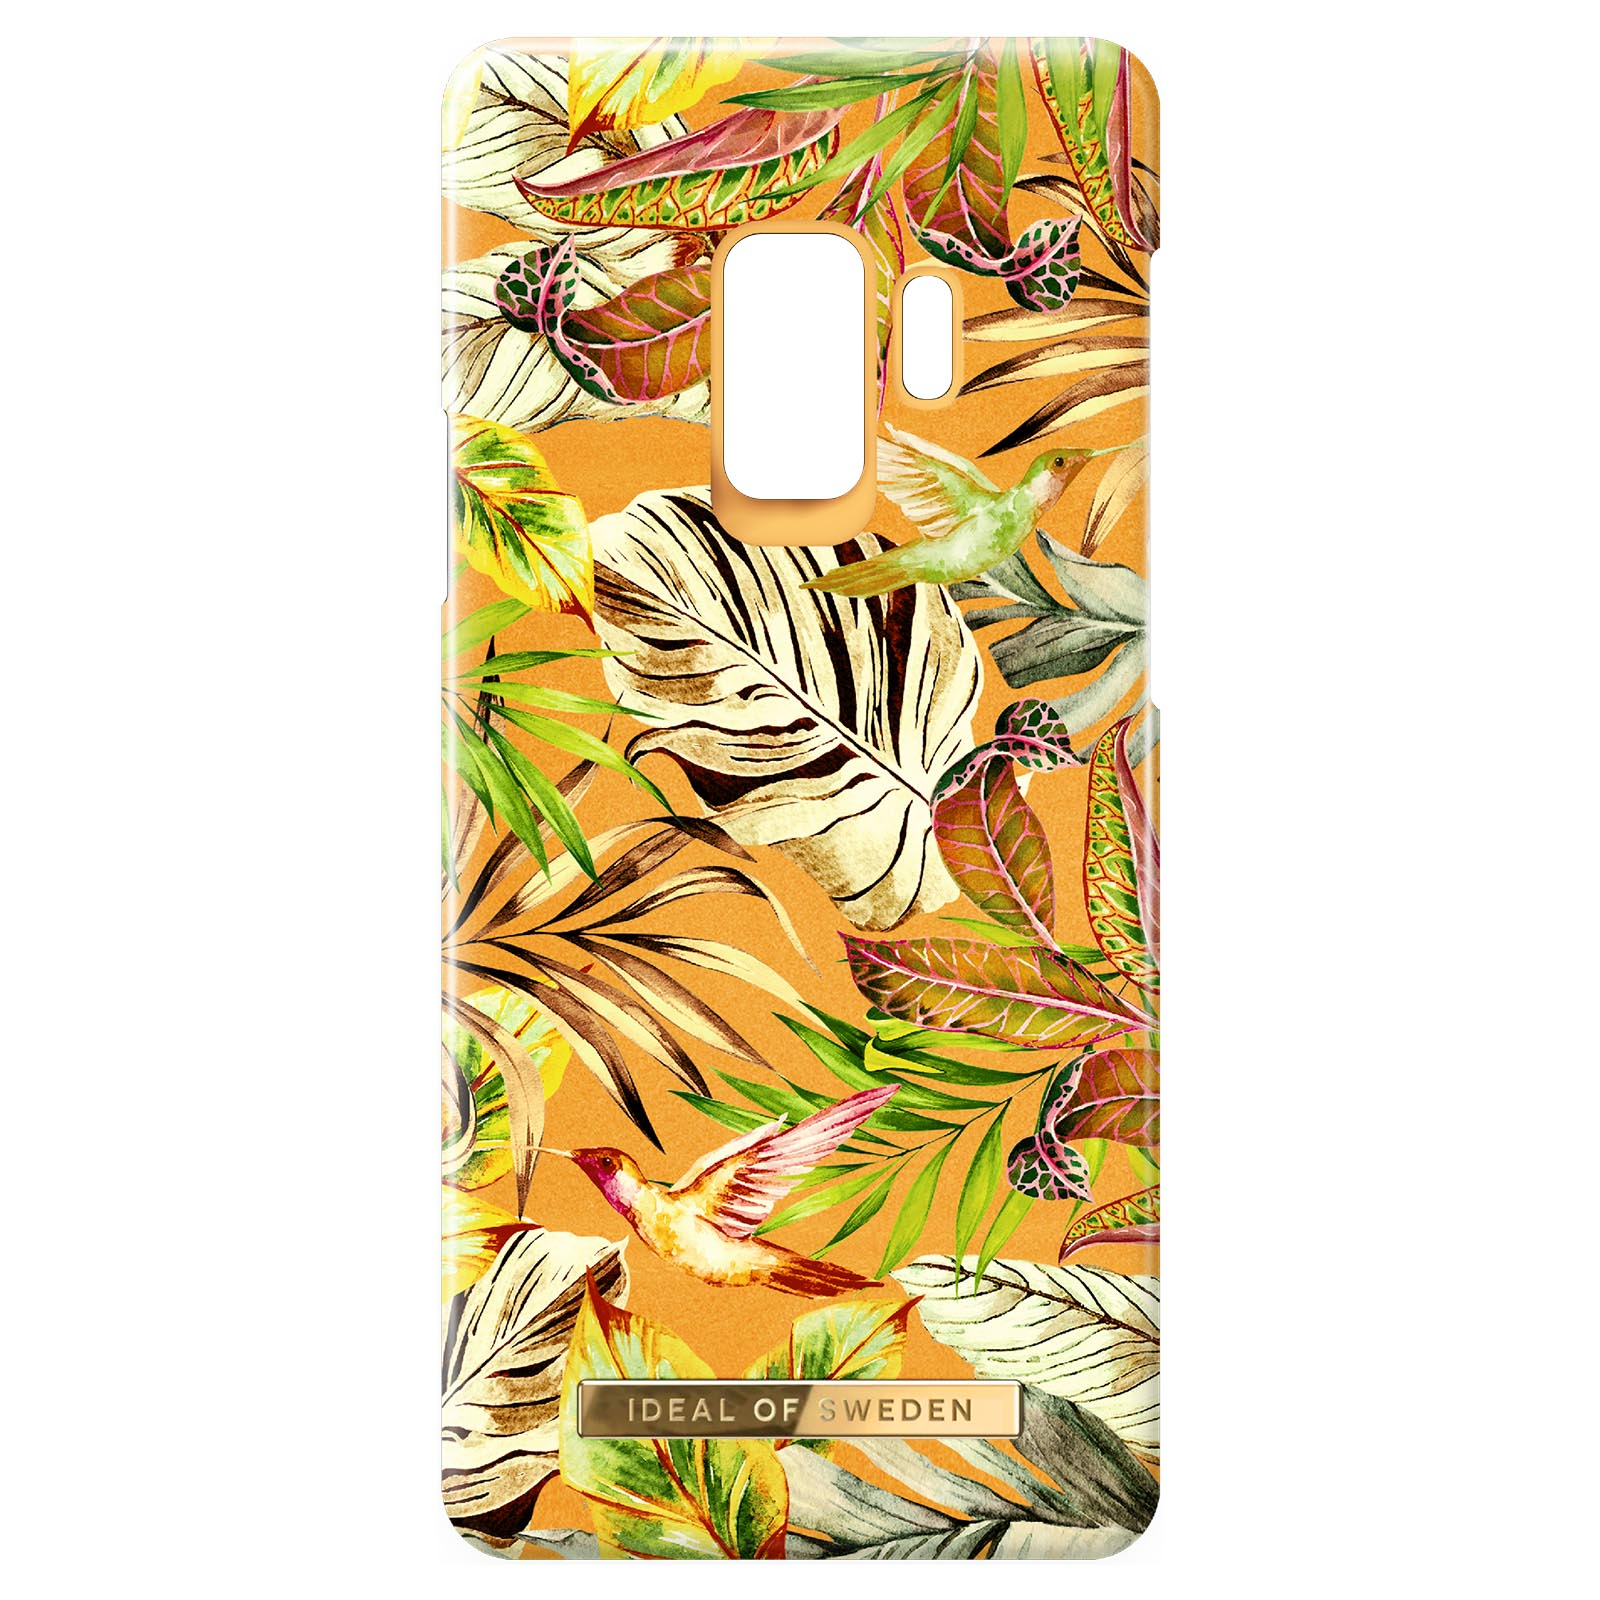 SWEDEN Series, OF Hülle Galaxy Orange S9, IDEAL Backcover, Jungle Samsung, Mango